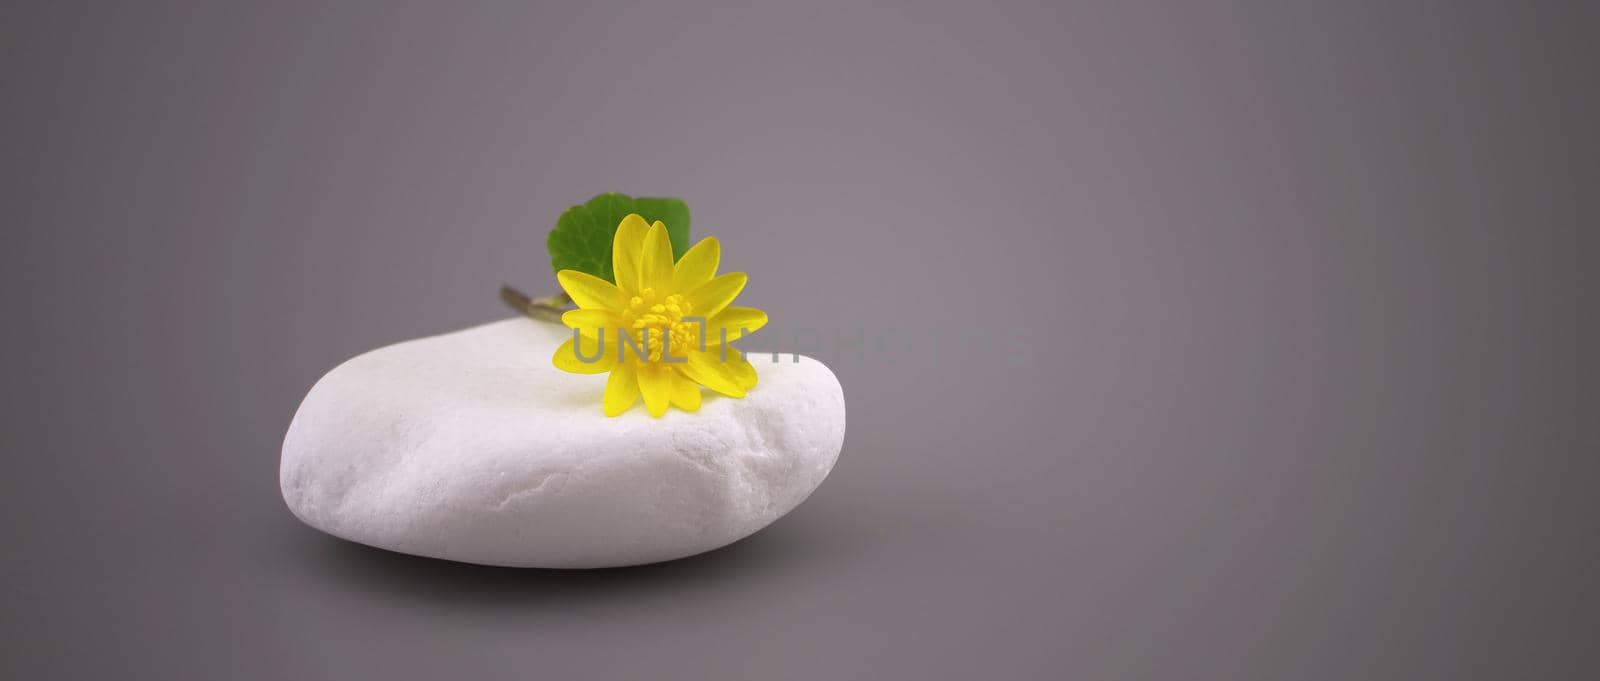 Simple minimalist style springtime background with yellow spring flower on white stone over gray background with copy space